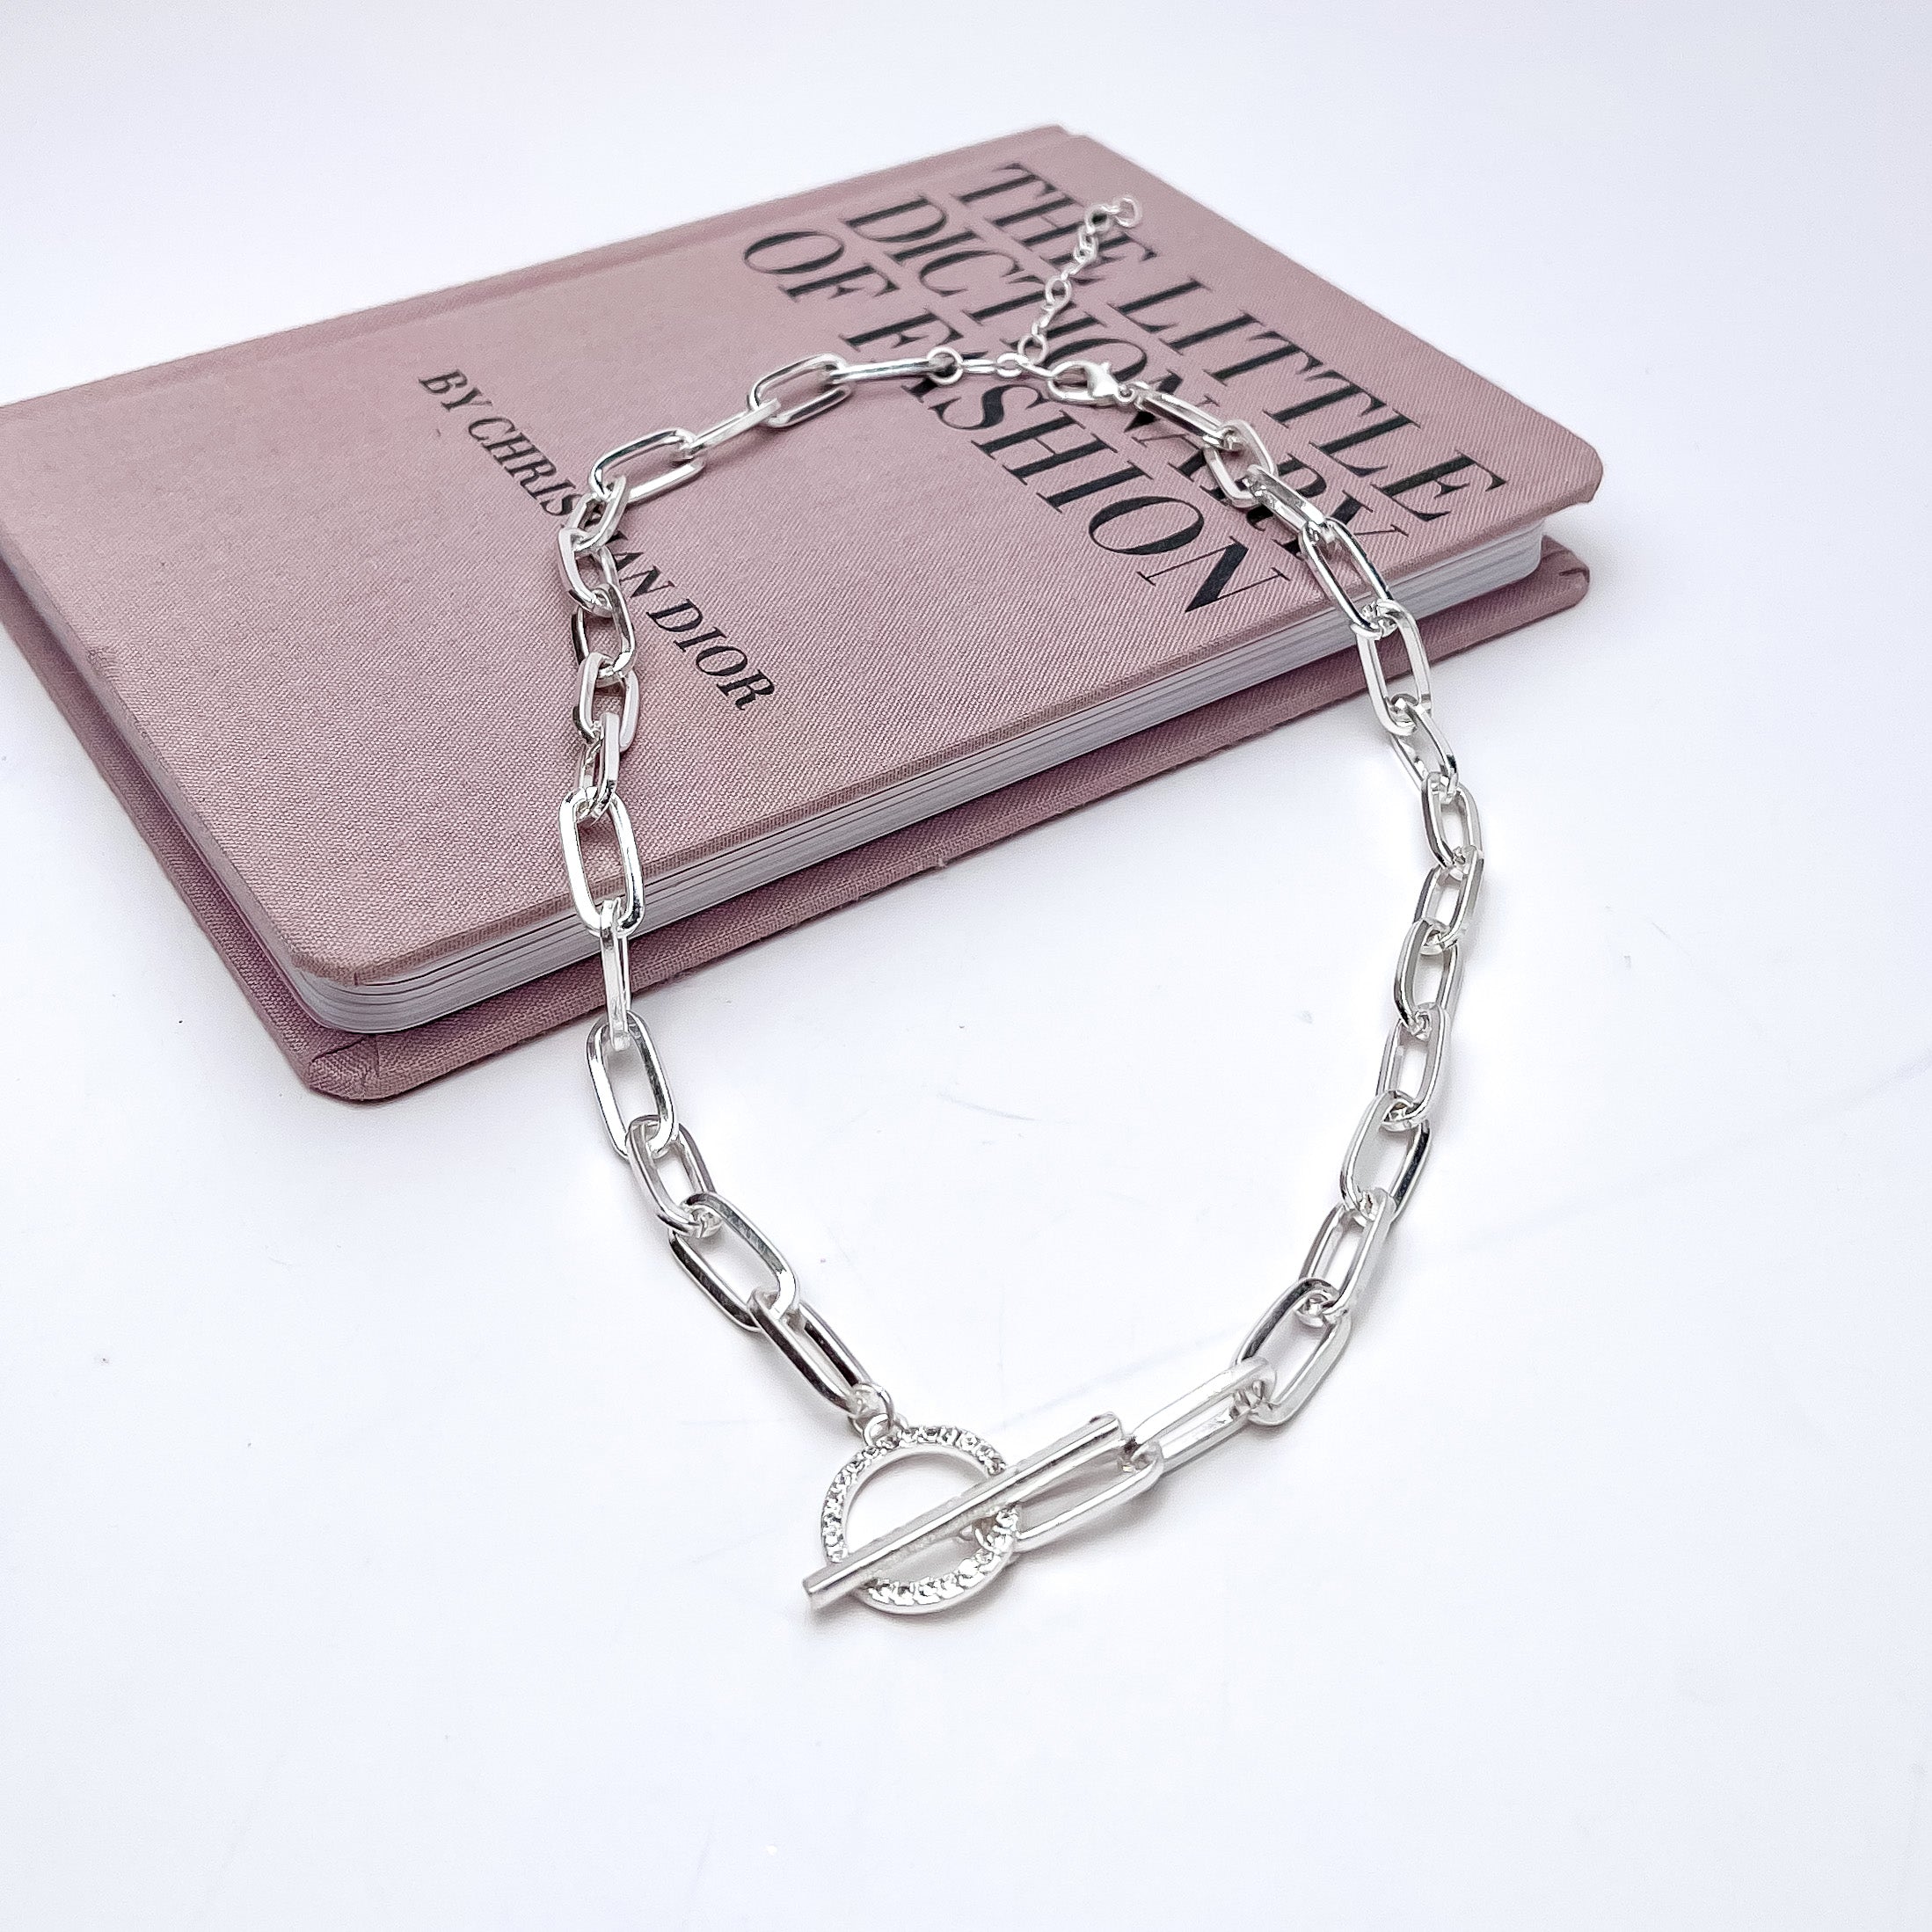 Front and Center Silver Tone Chain Necklace With Front Toggle. Pictured with a white background and part of the necklace laying on a pink book.